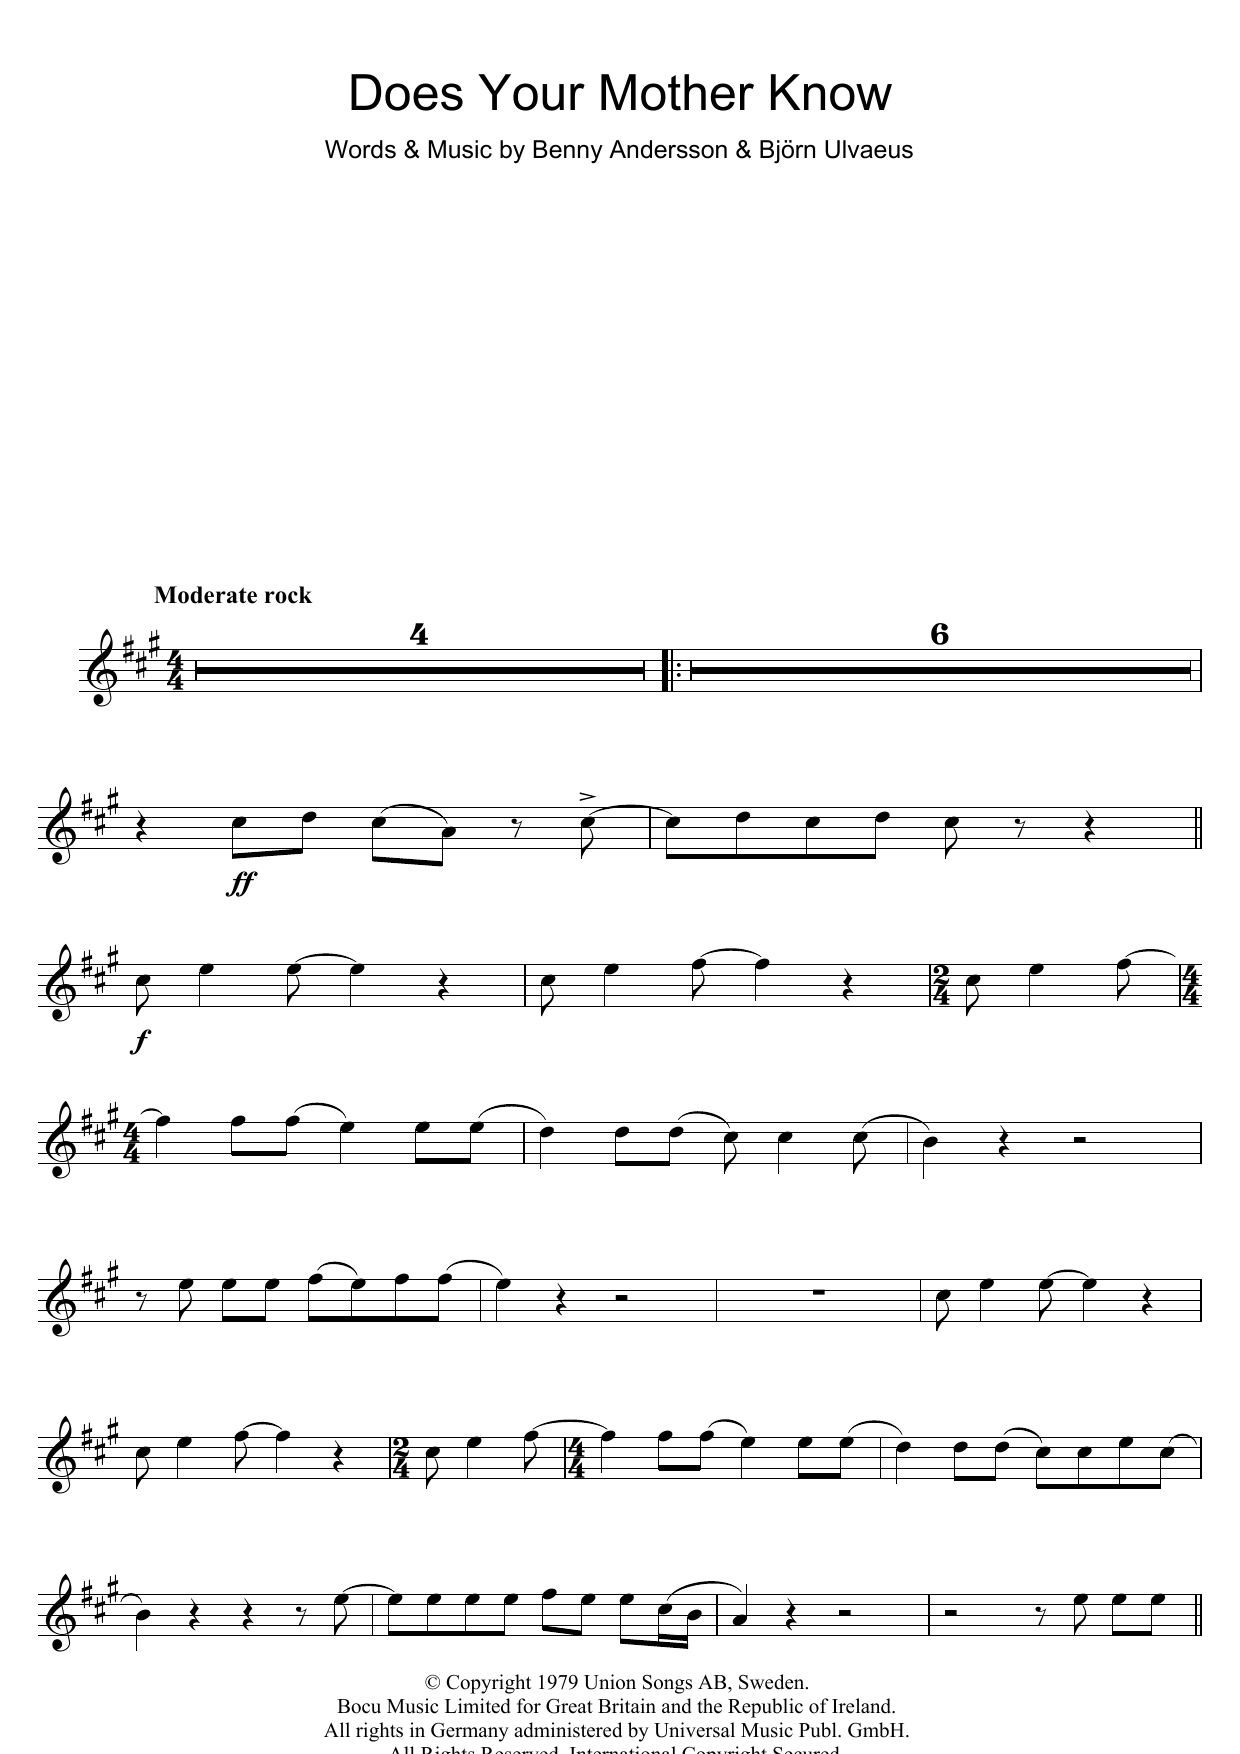 Download ABBA Does Your Mother Know Sheet Music